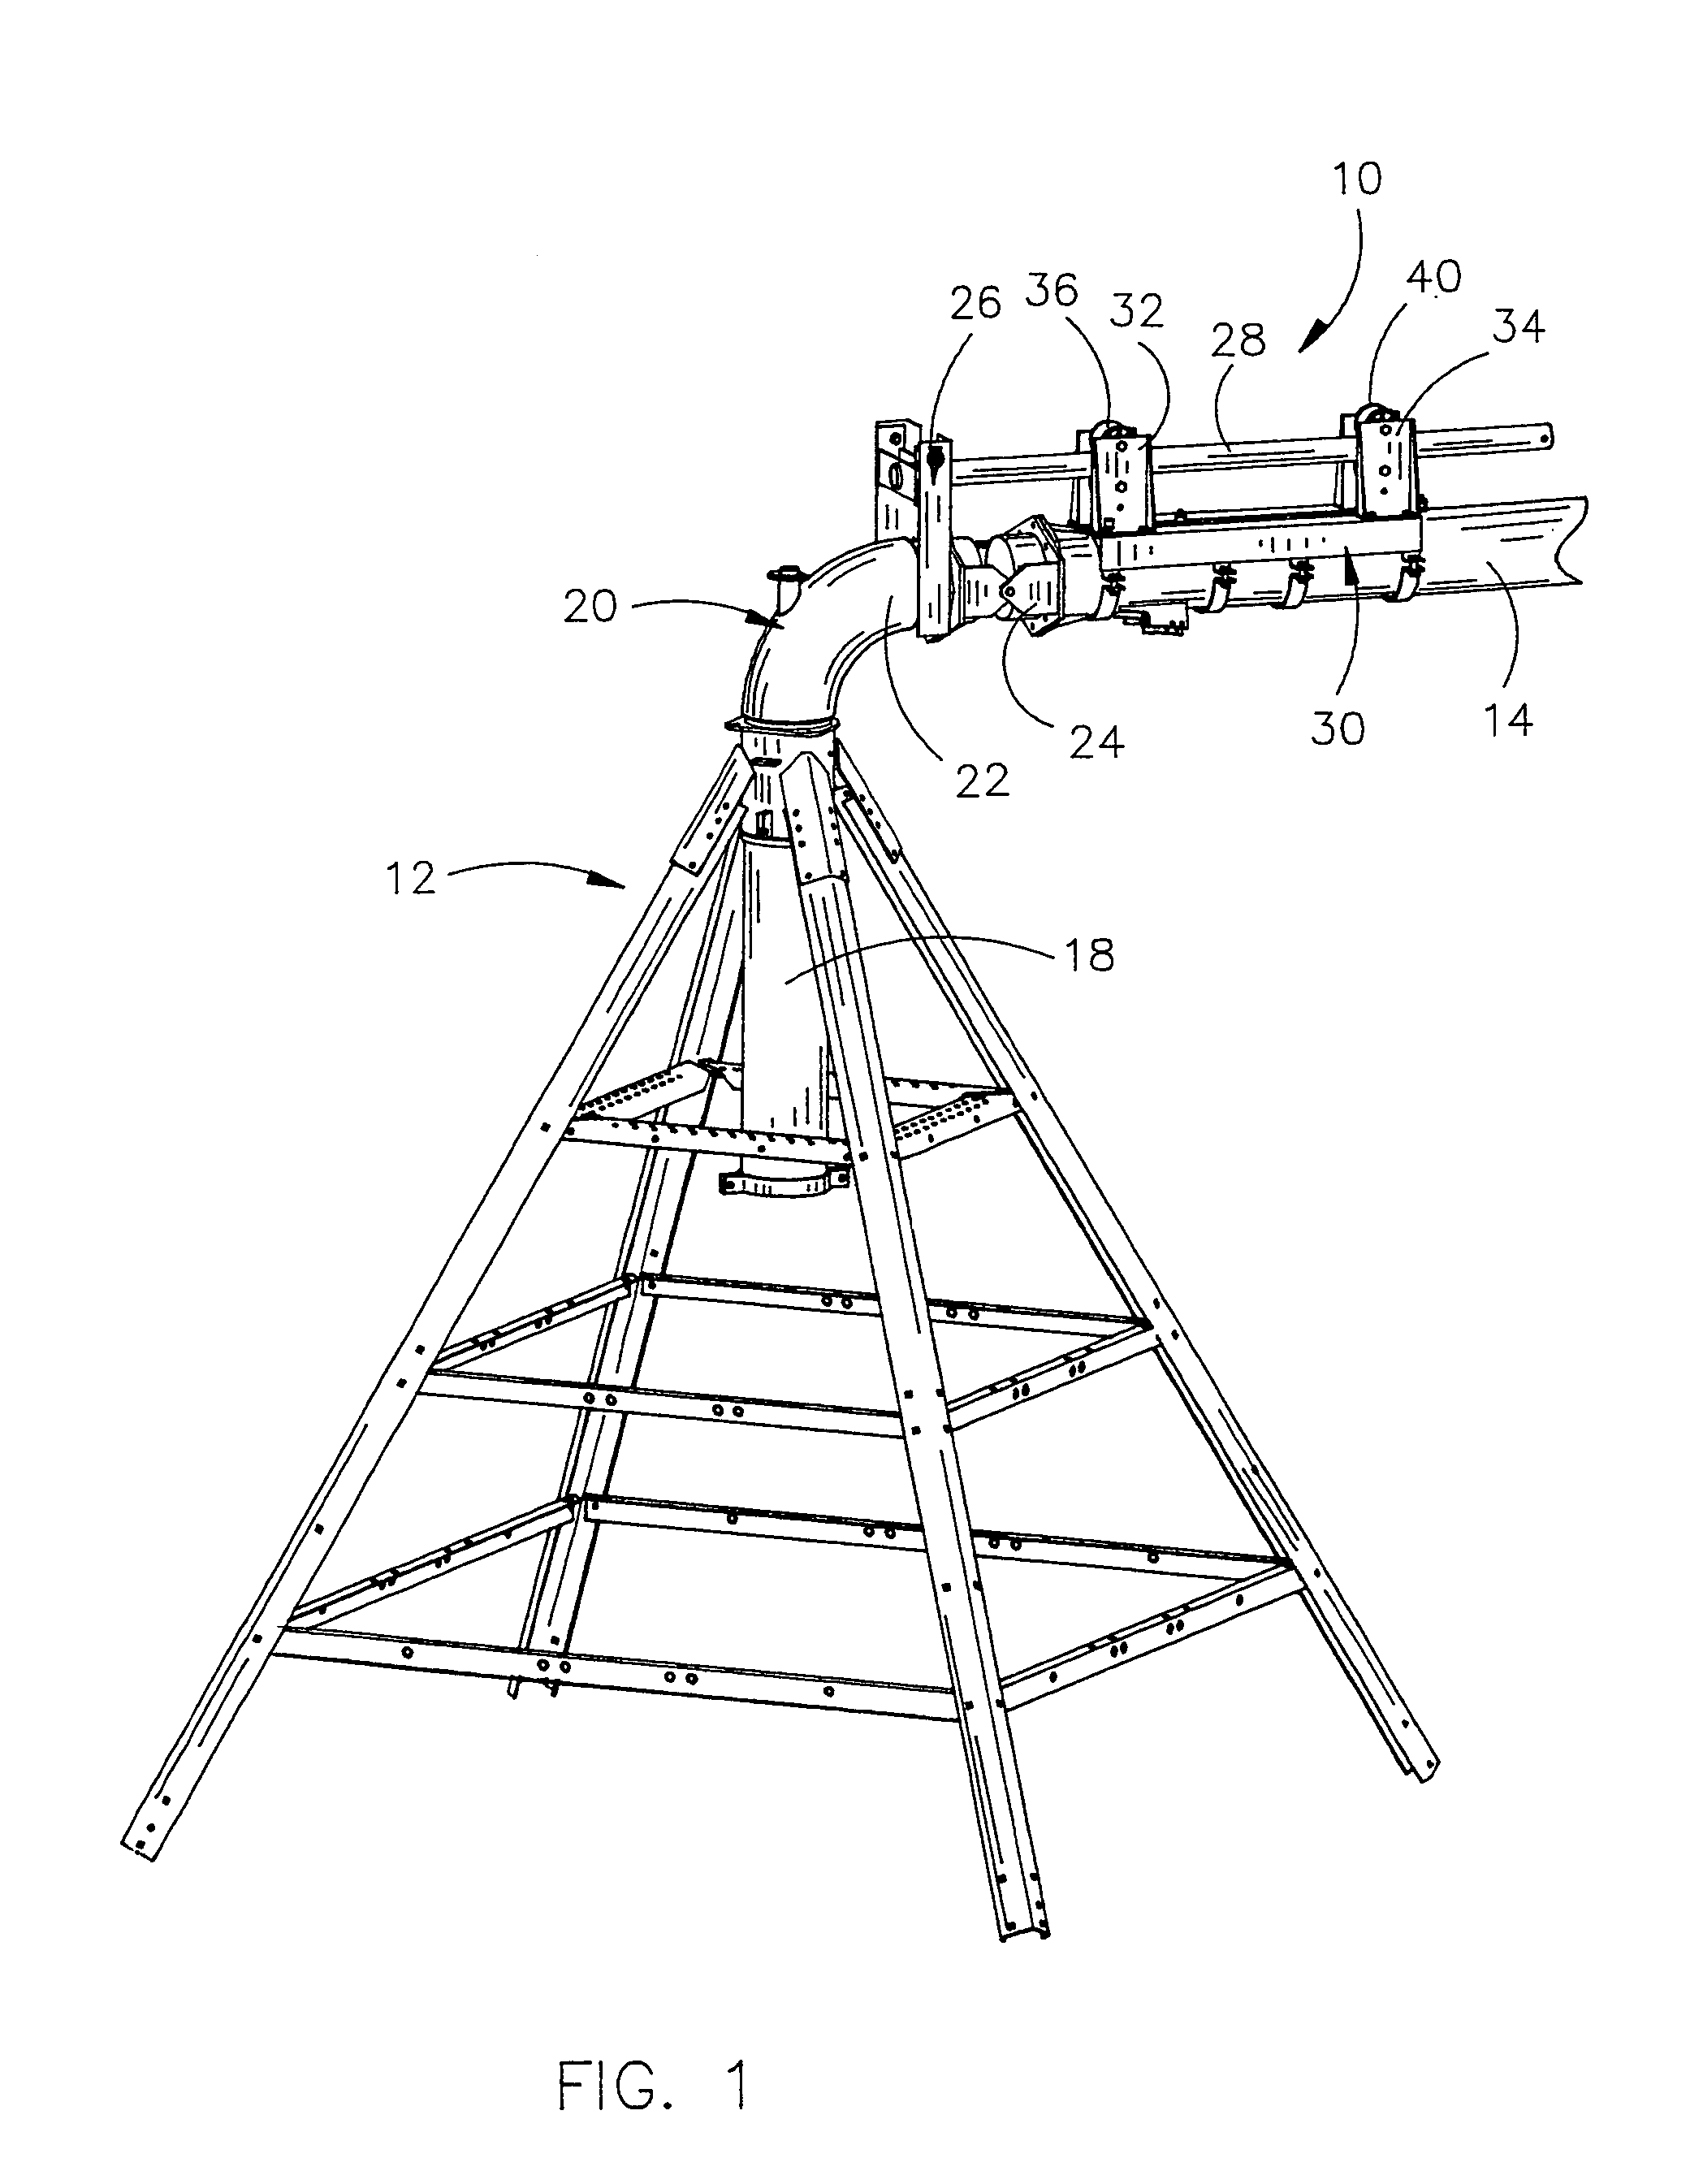 Method and means for reducing stress in a pivot irrigation pipeline